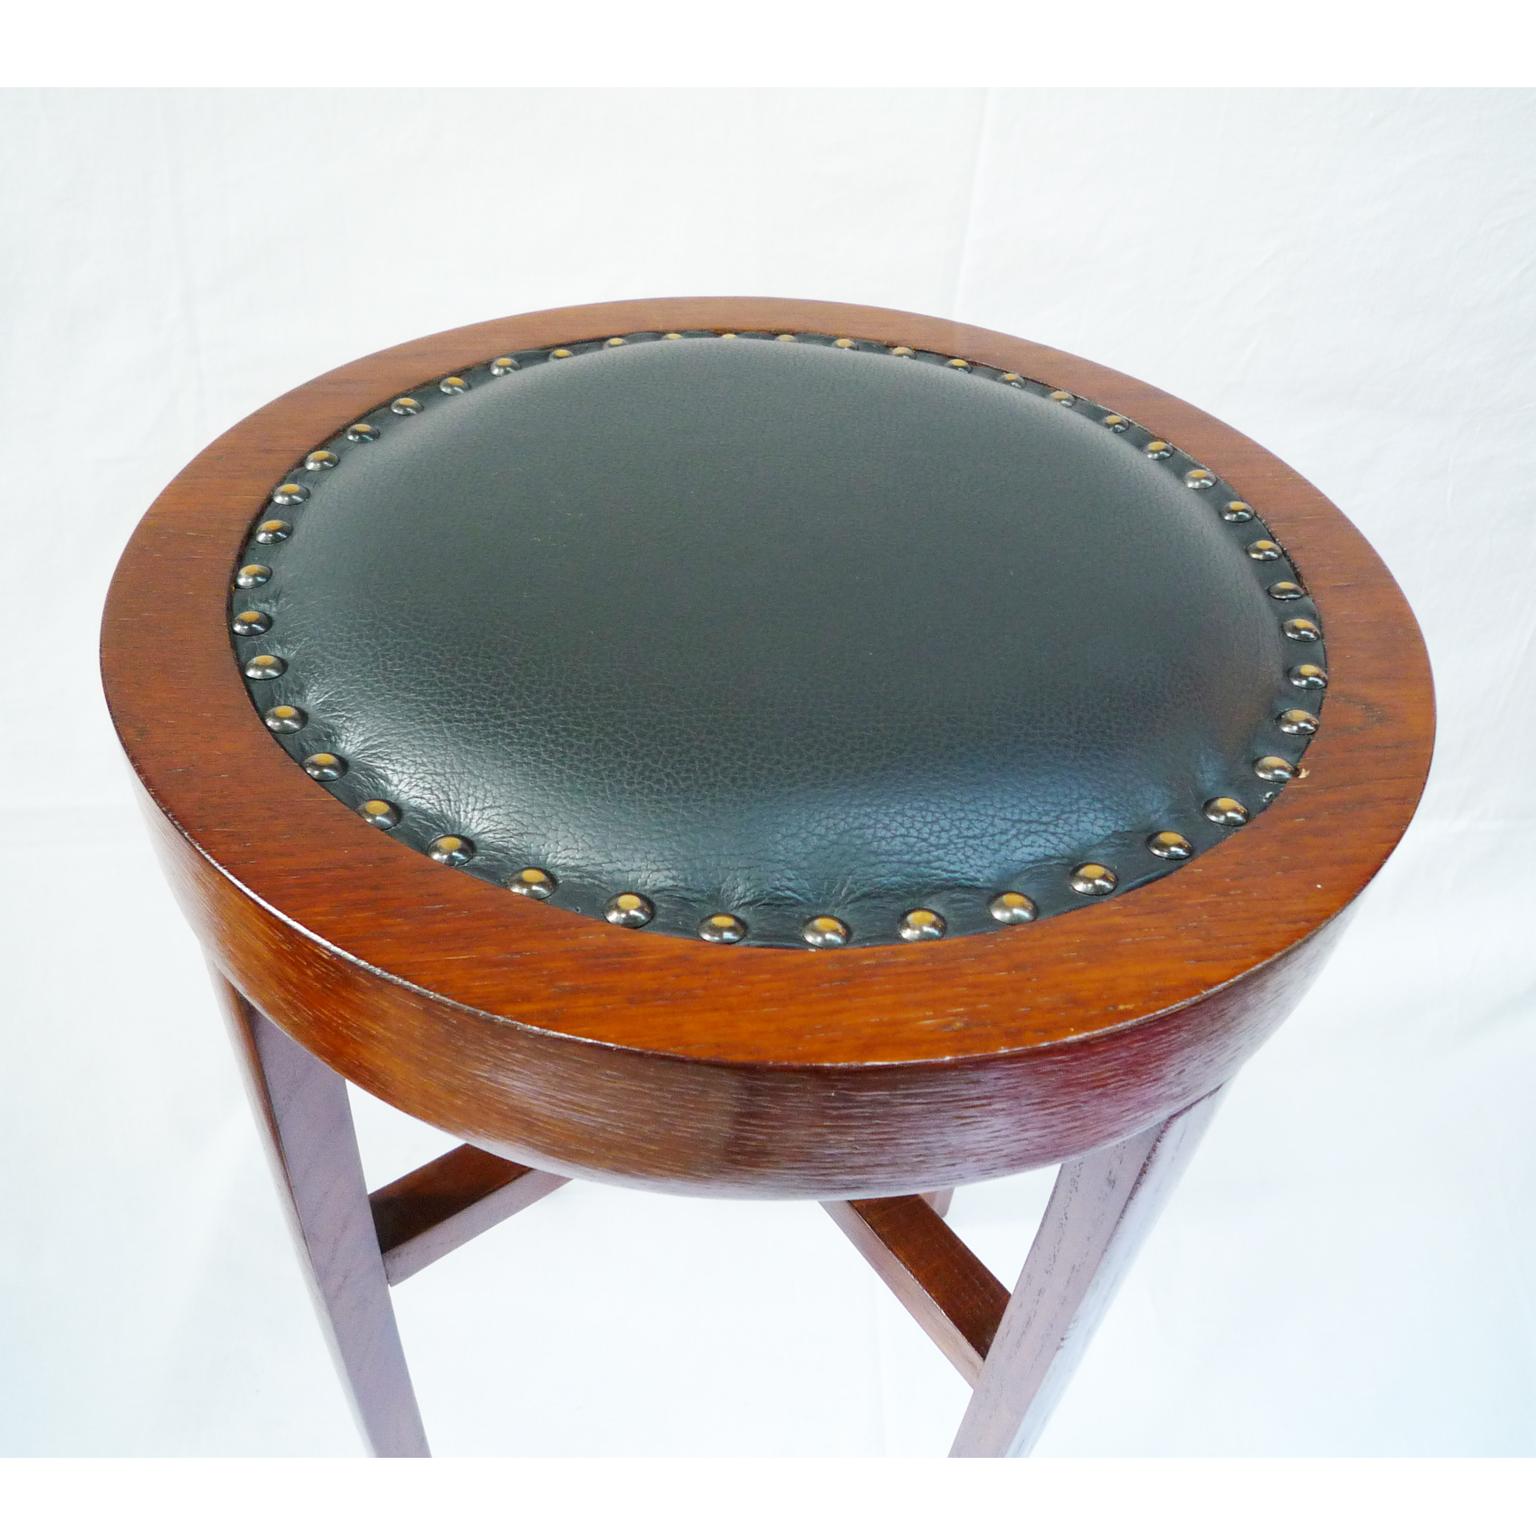 Classicist stool with leather upholstery
Small stool made of oak, the seat is made of softwood and veneered in oak, restored condition, newly upholstered (leather) and hand polished with shellac.
Measures: D 33
H 48
Germany, circa 1810.